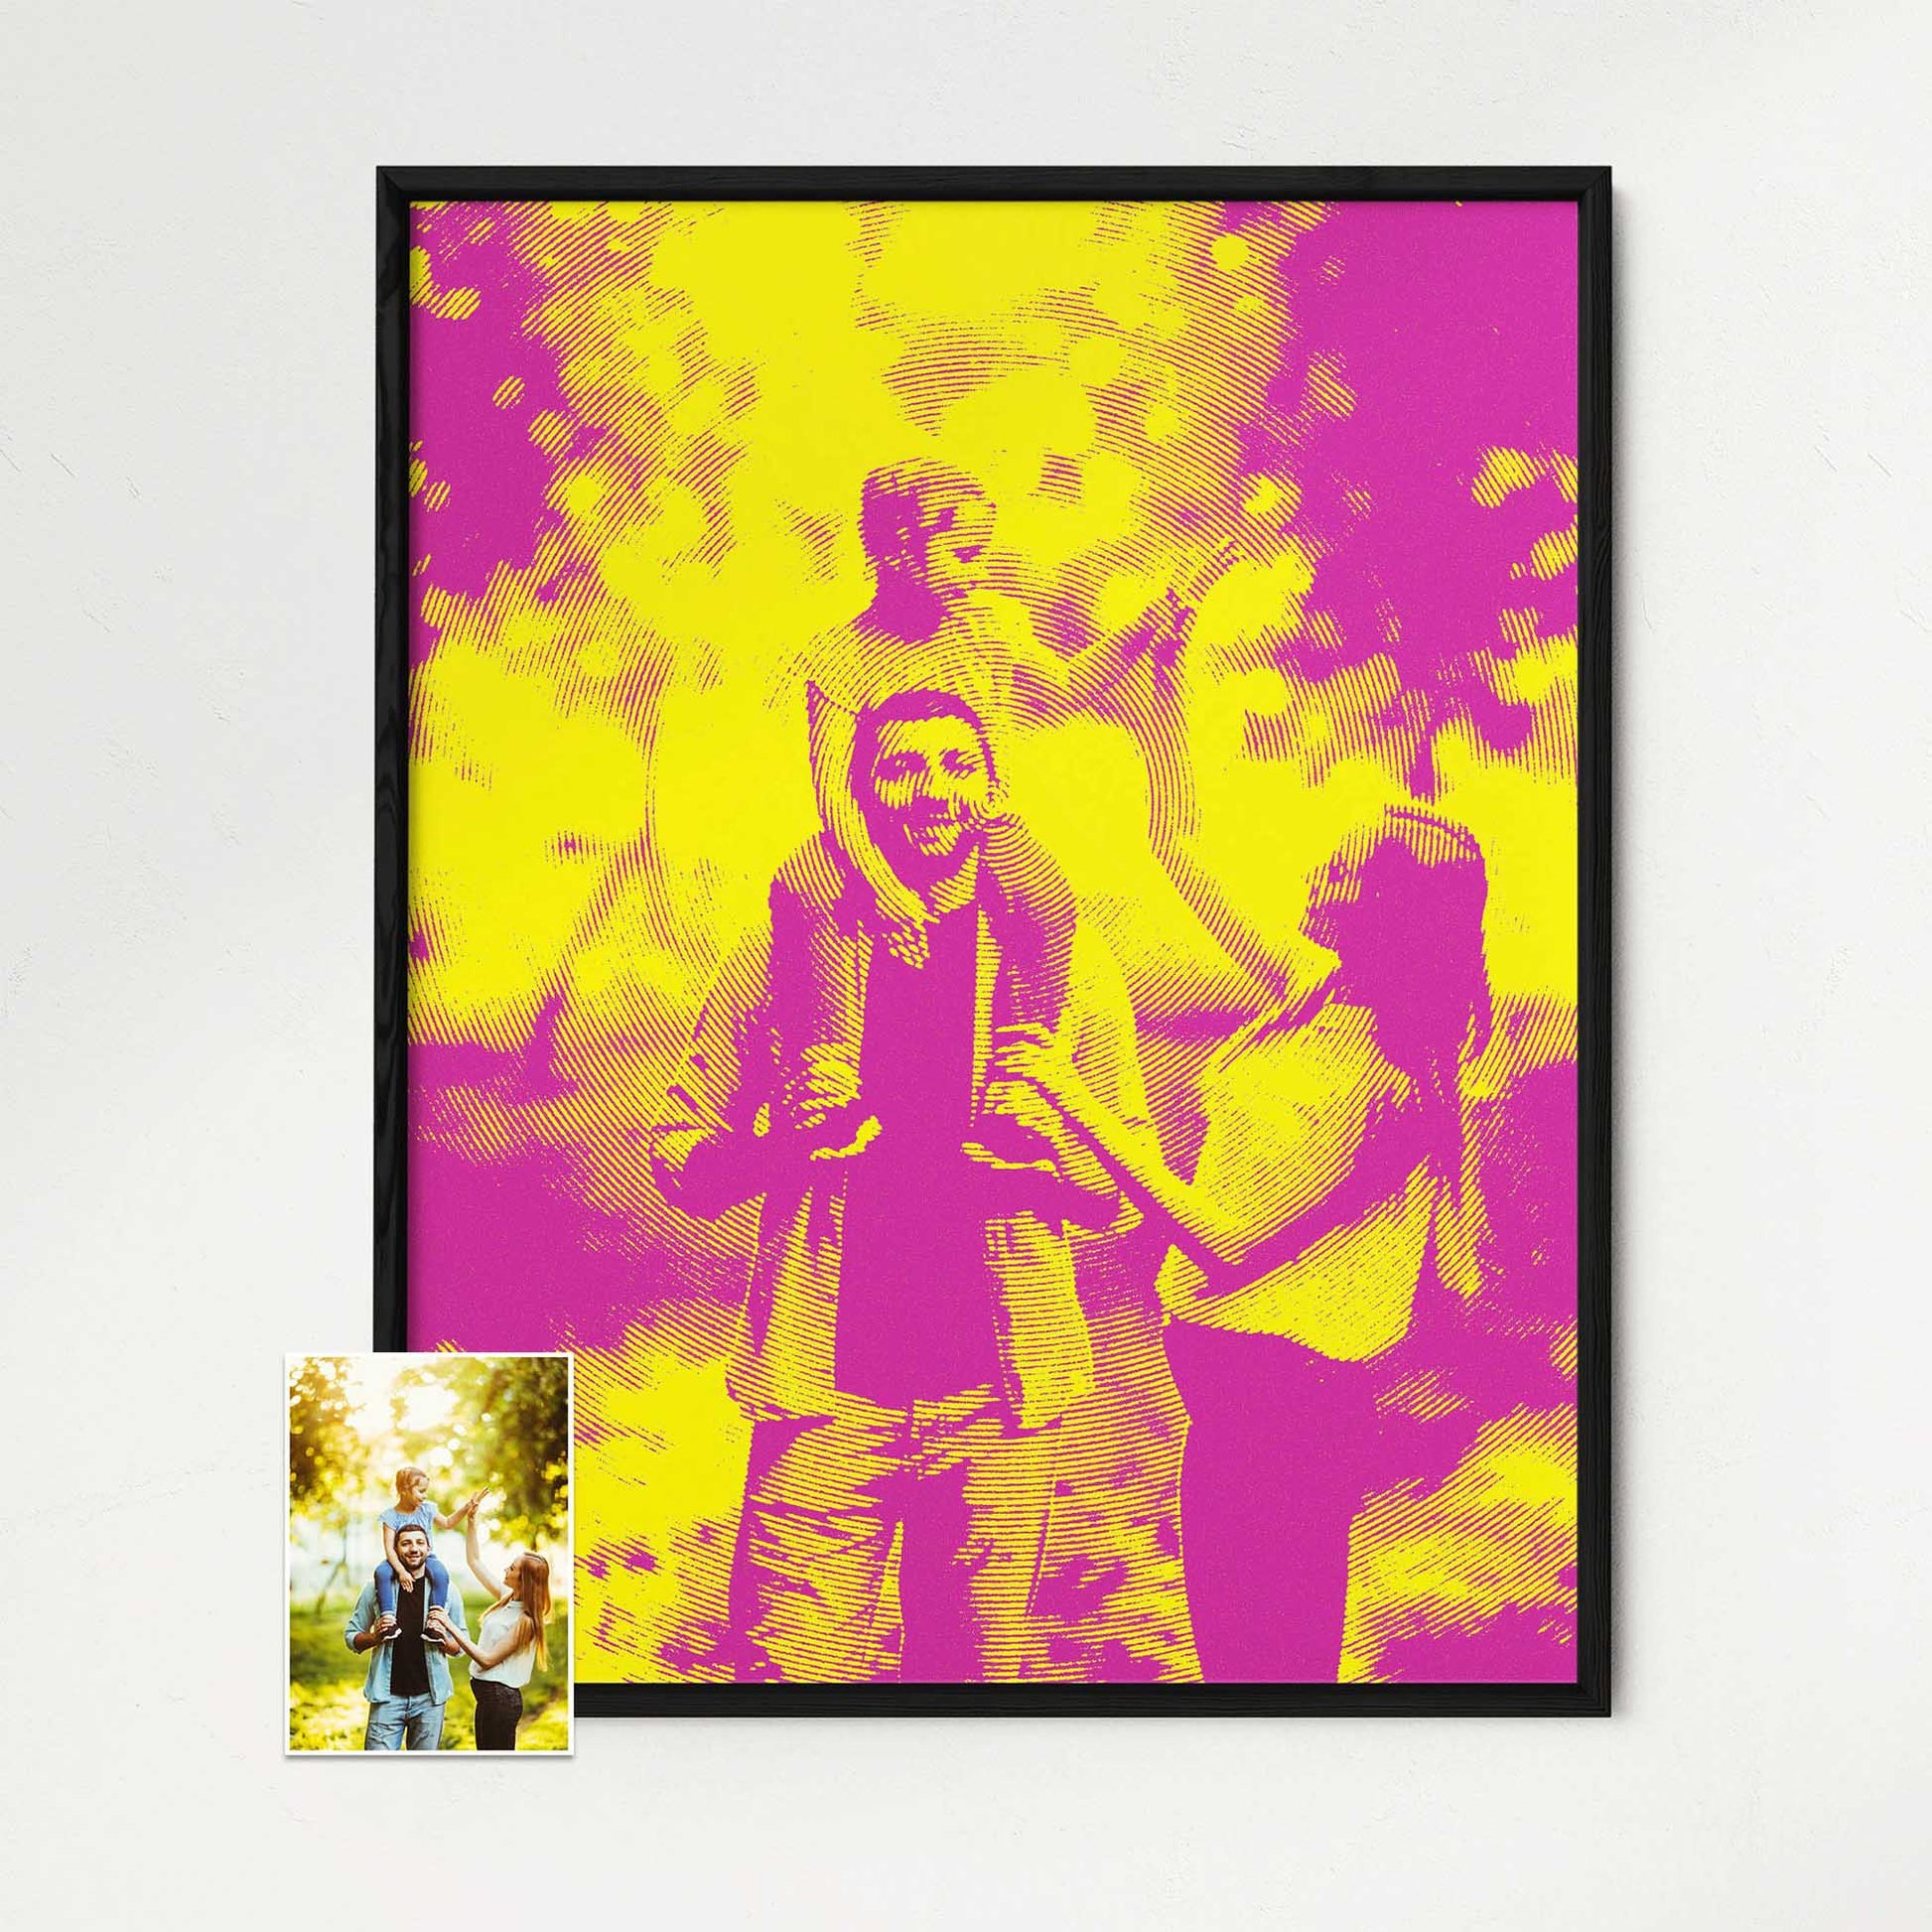 Indulge in the vibrancy of Personalised Yellow & Pink Texture Framed Print. Its fun and vibrant colors create a vivid visual experience, spreading laughter and smiles. Crafted from your photo, this chic and cool artwork embodies a modern art